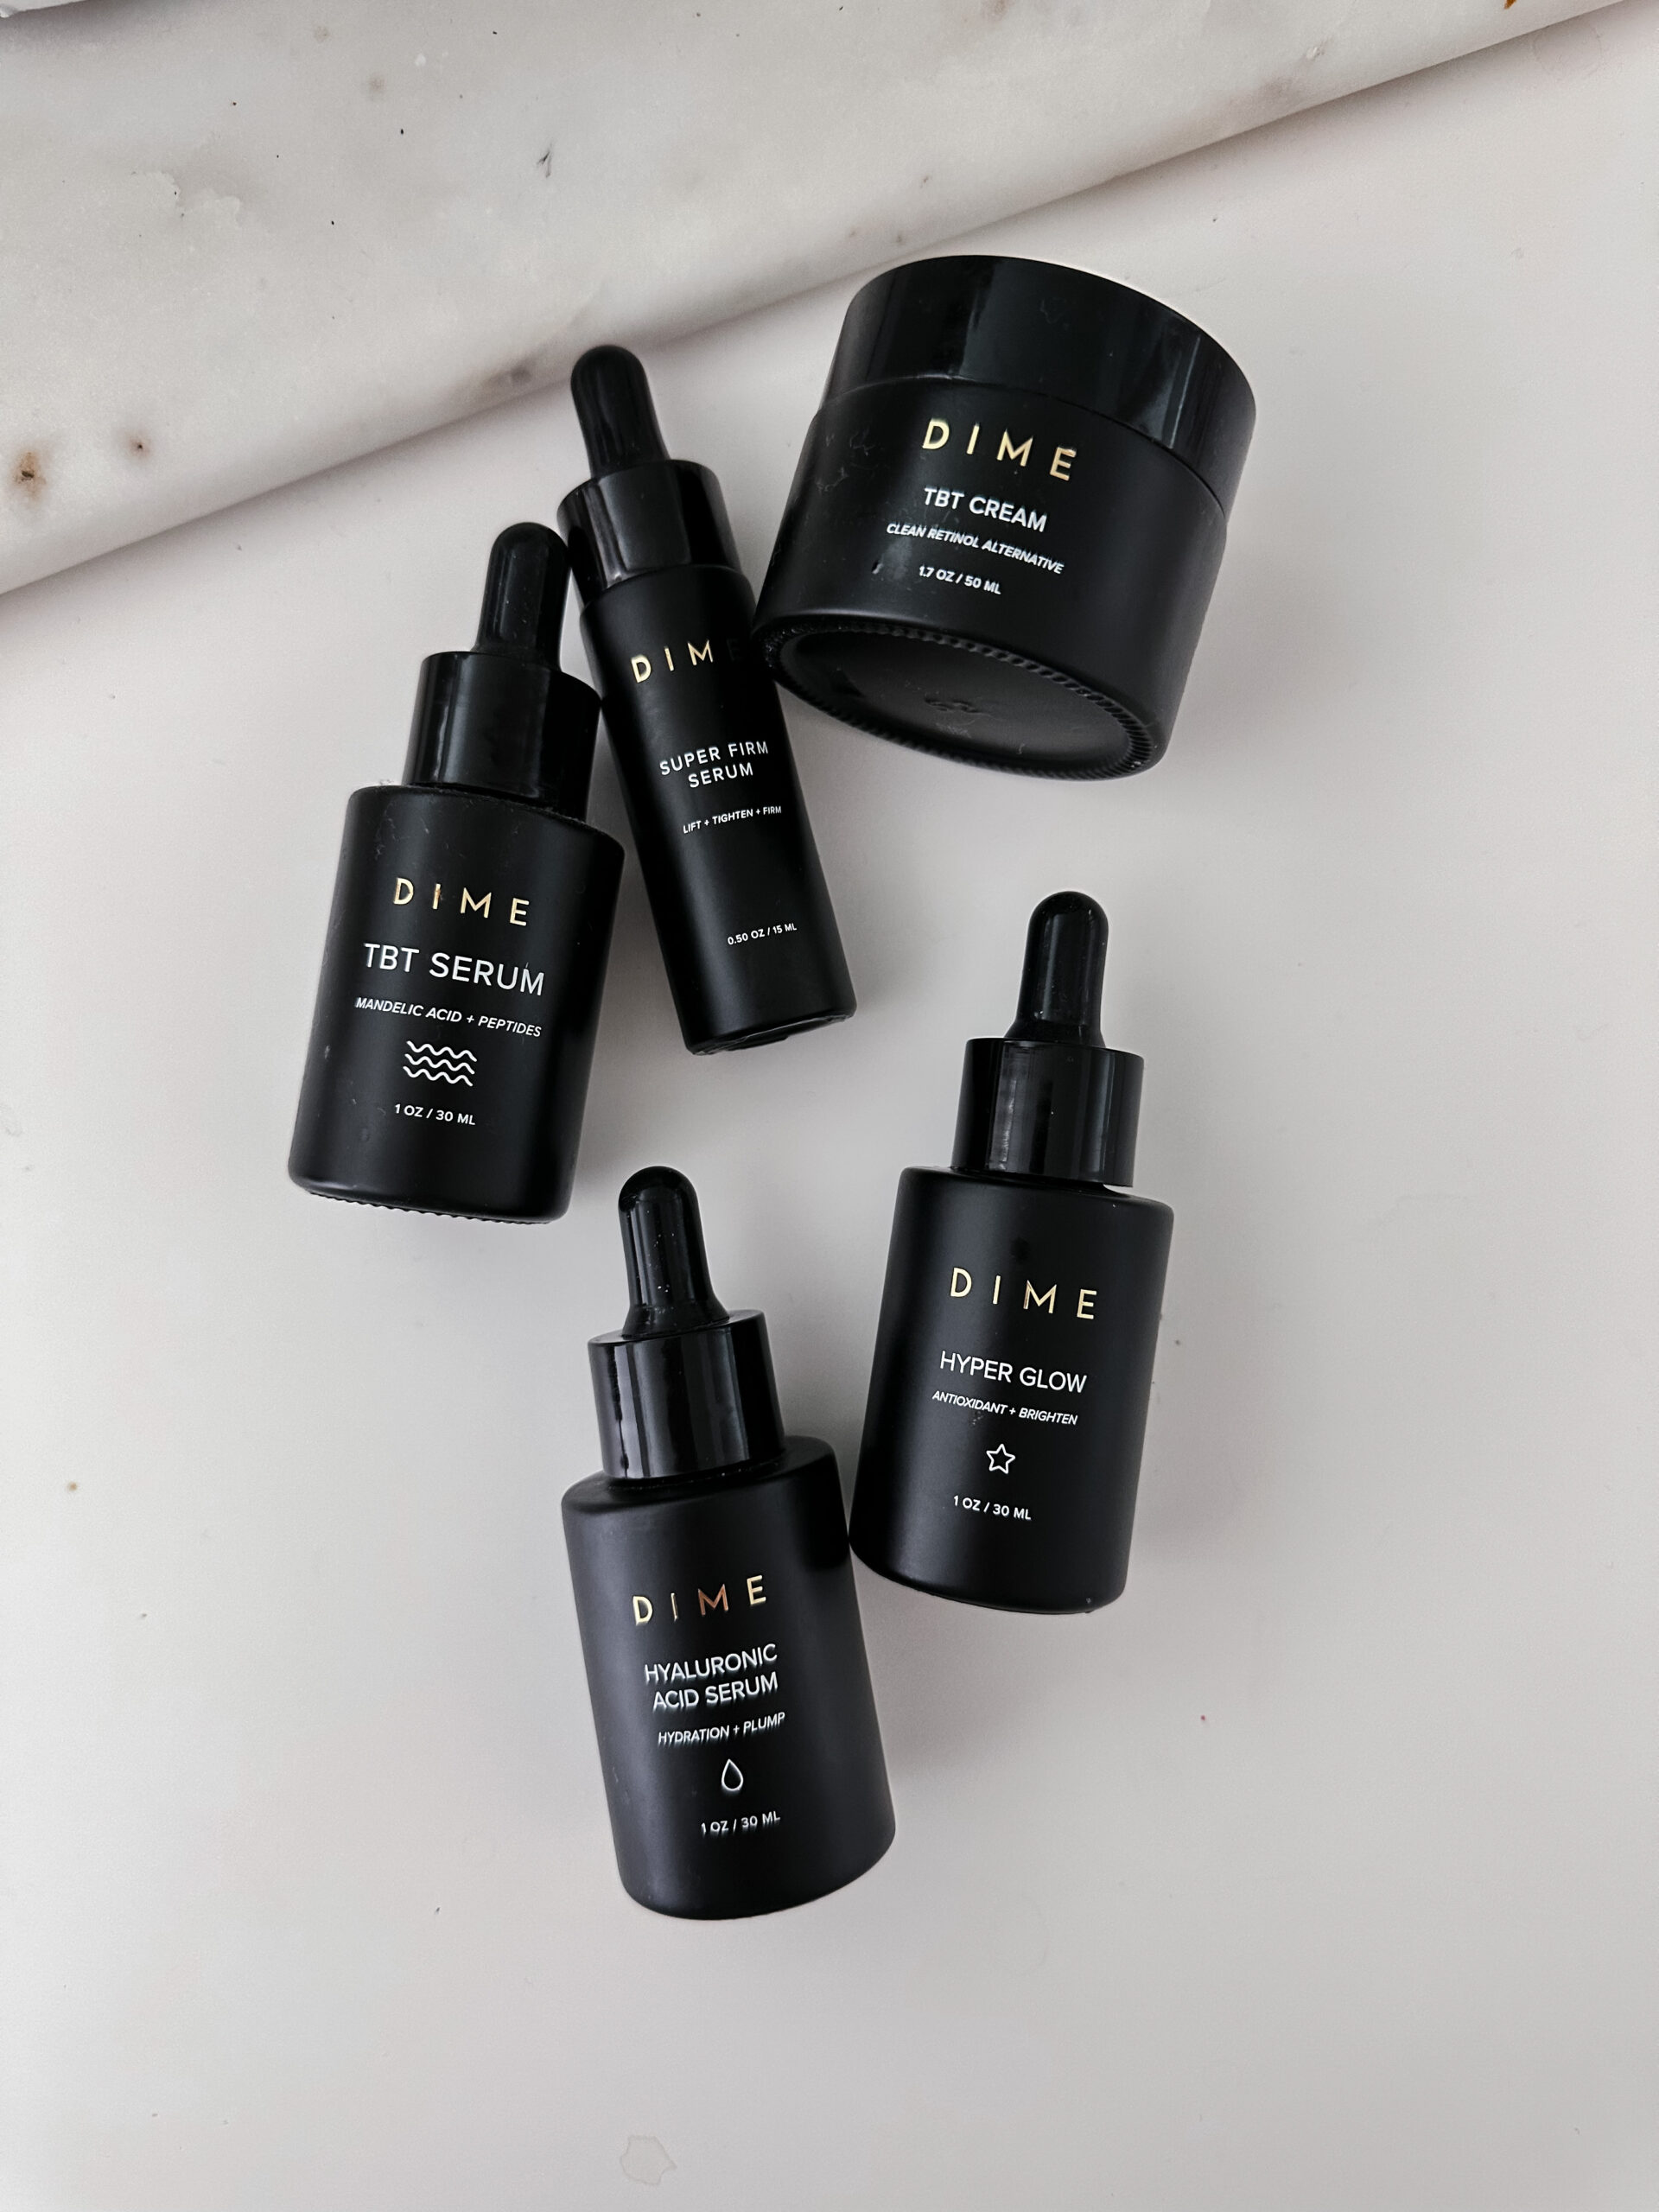 DIME BEAUTY FAVORITES-Jaclyn De Leon style. Dime beauty is a clean beauty brand and not only are their products affordable but they really work. I'm obsessed with their serums, fragrances, and now their body care line.